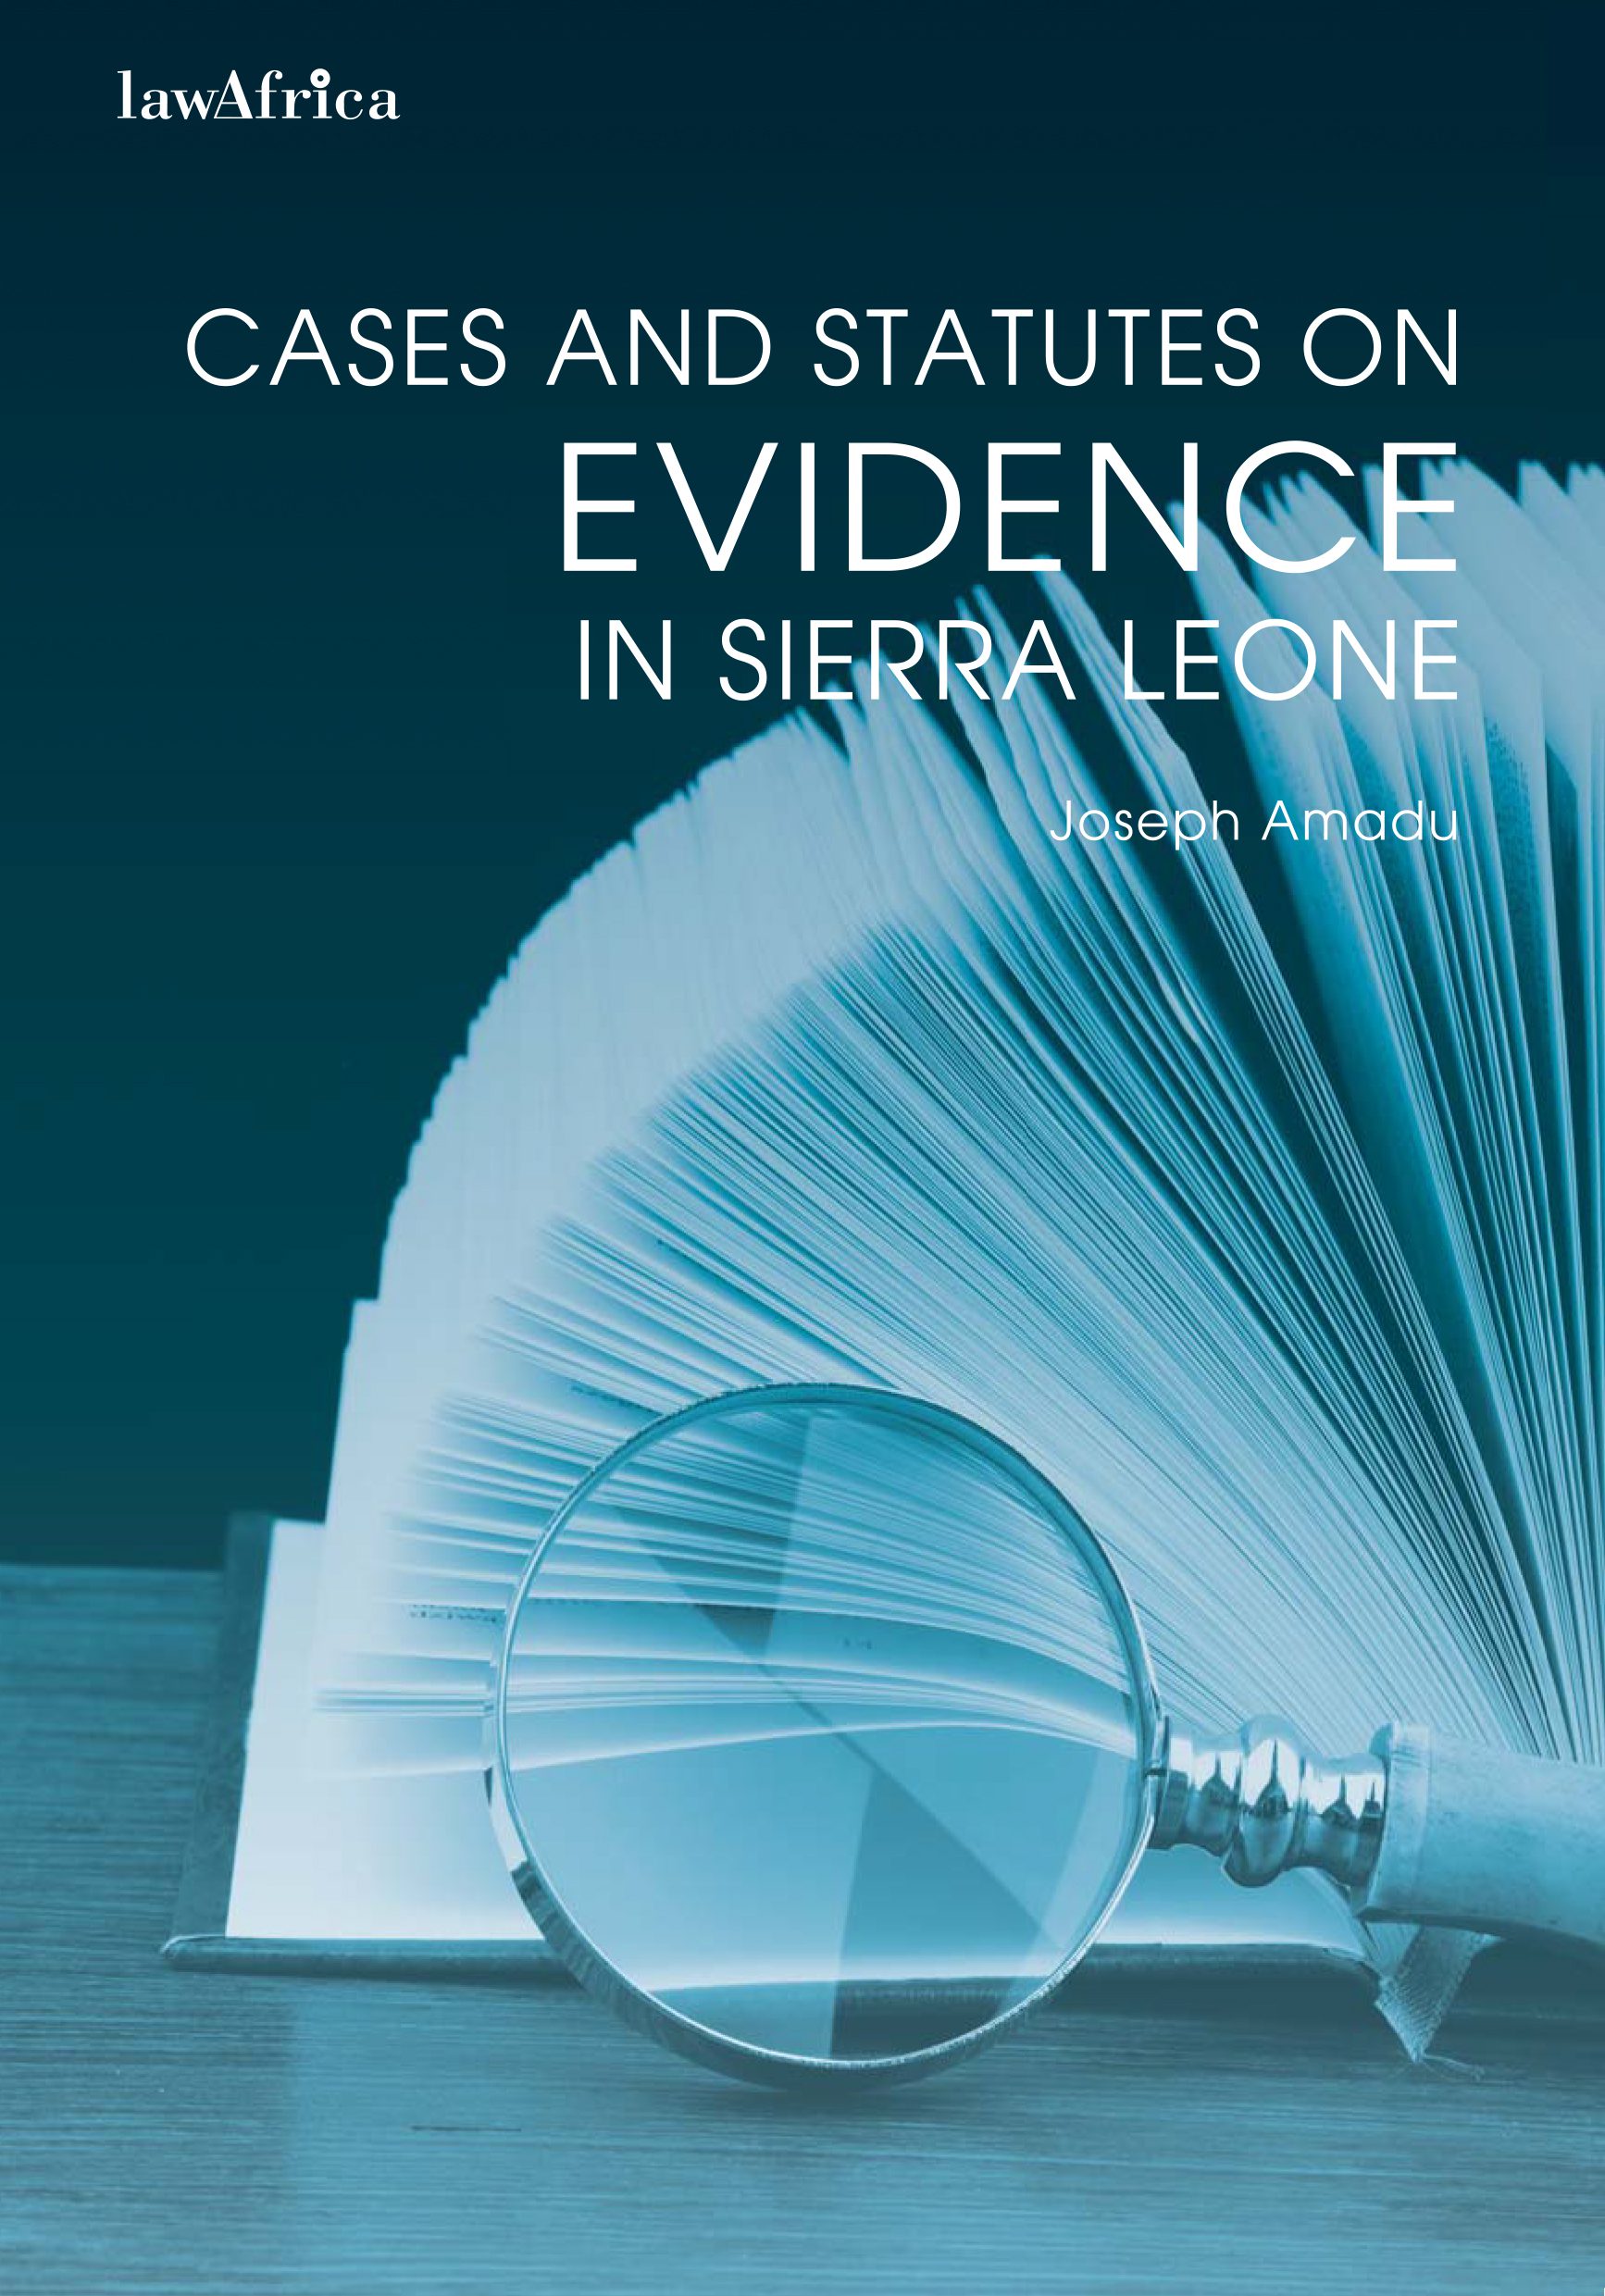 Sierra　Cases　Evidence　Leone　Amadu　by　Statutes　and　Store　on　in　Joseph　Nuria